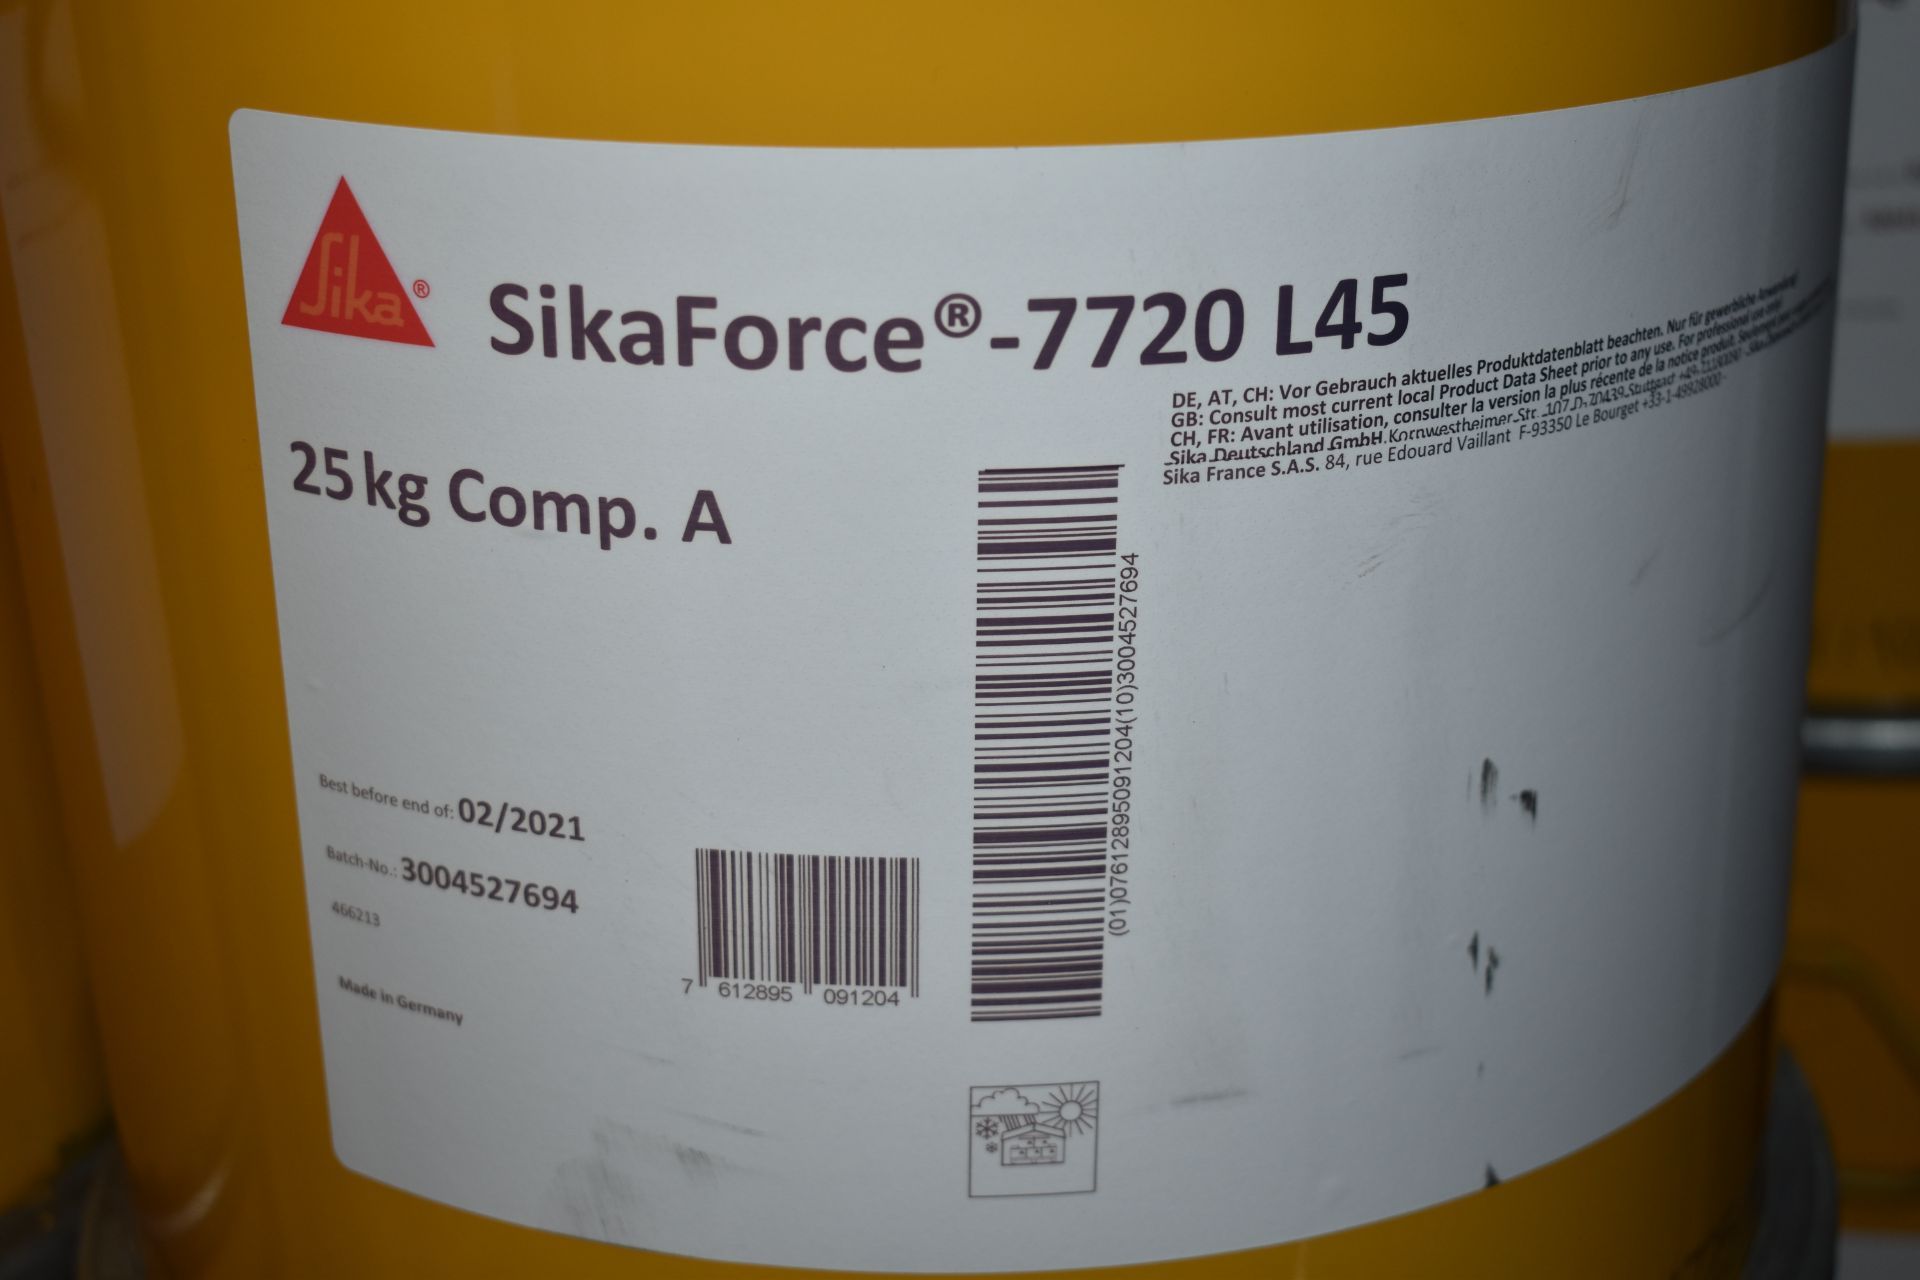 SikaForce -7720 L45 None Sagging Assembly Adhesive 25kg Barrel - New Sealed Stock - New - CL622 - Re - Image 3 of 3